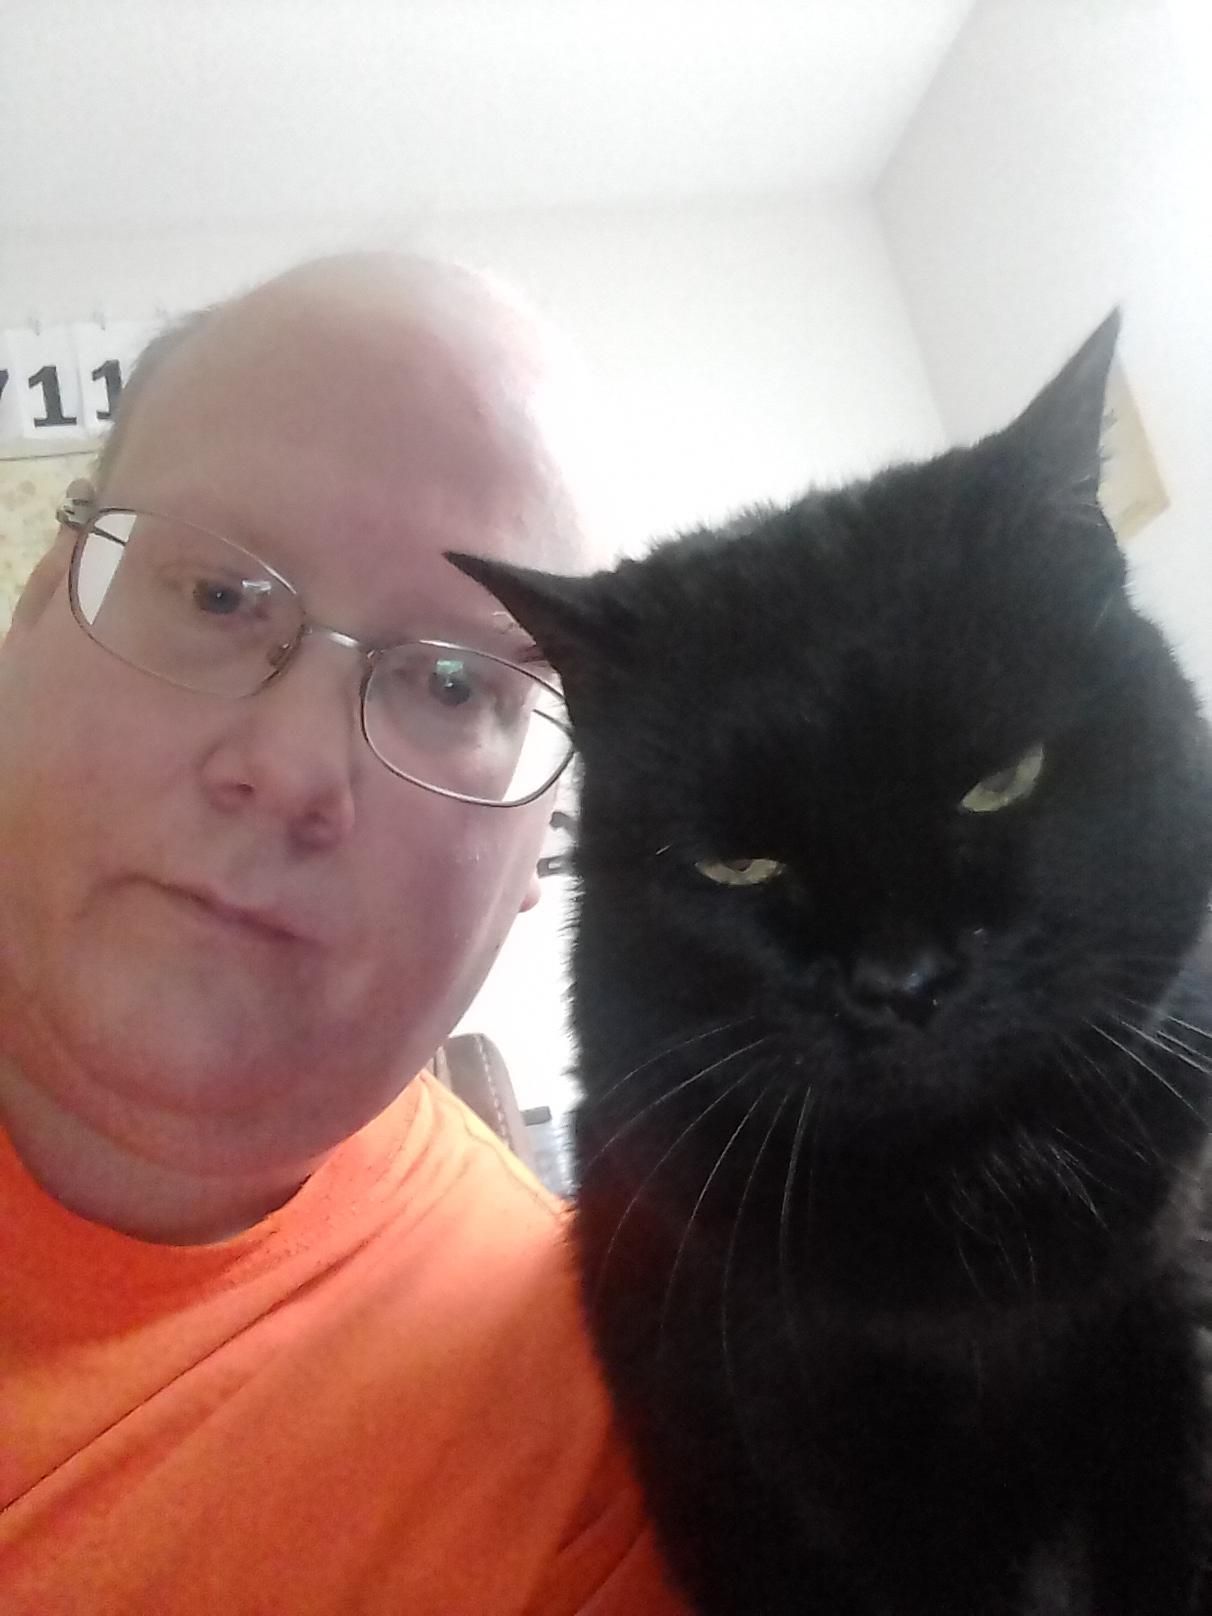 I tried to take a selfie with my cat, but now it looks like we're about to drop a new album.